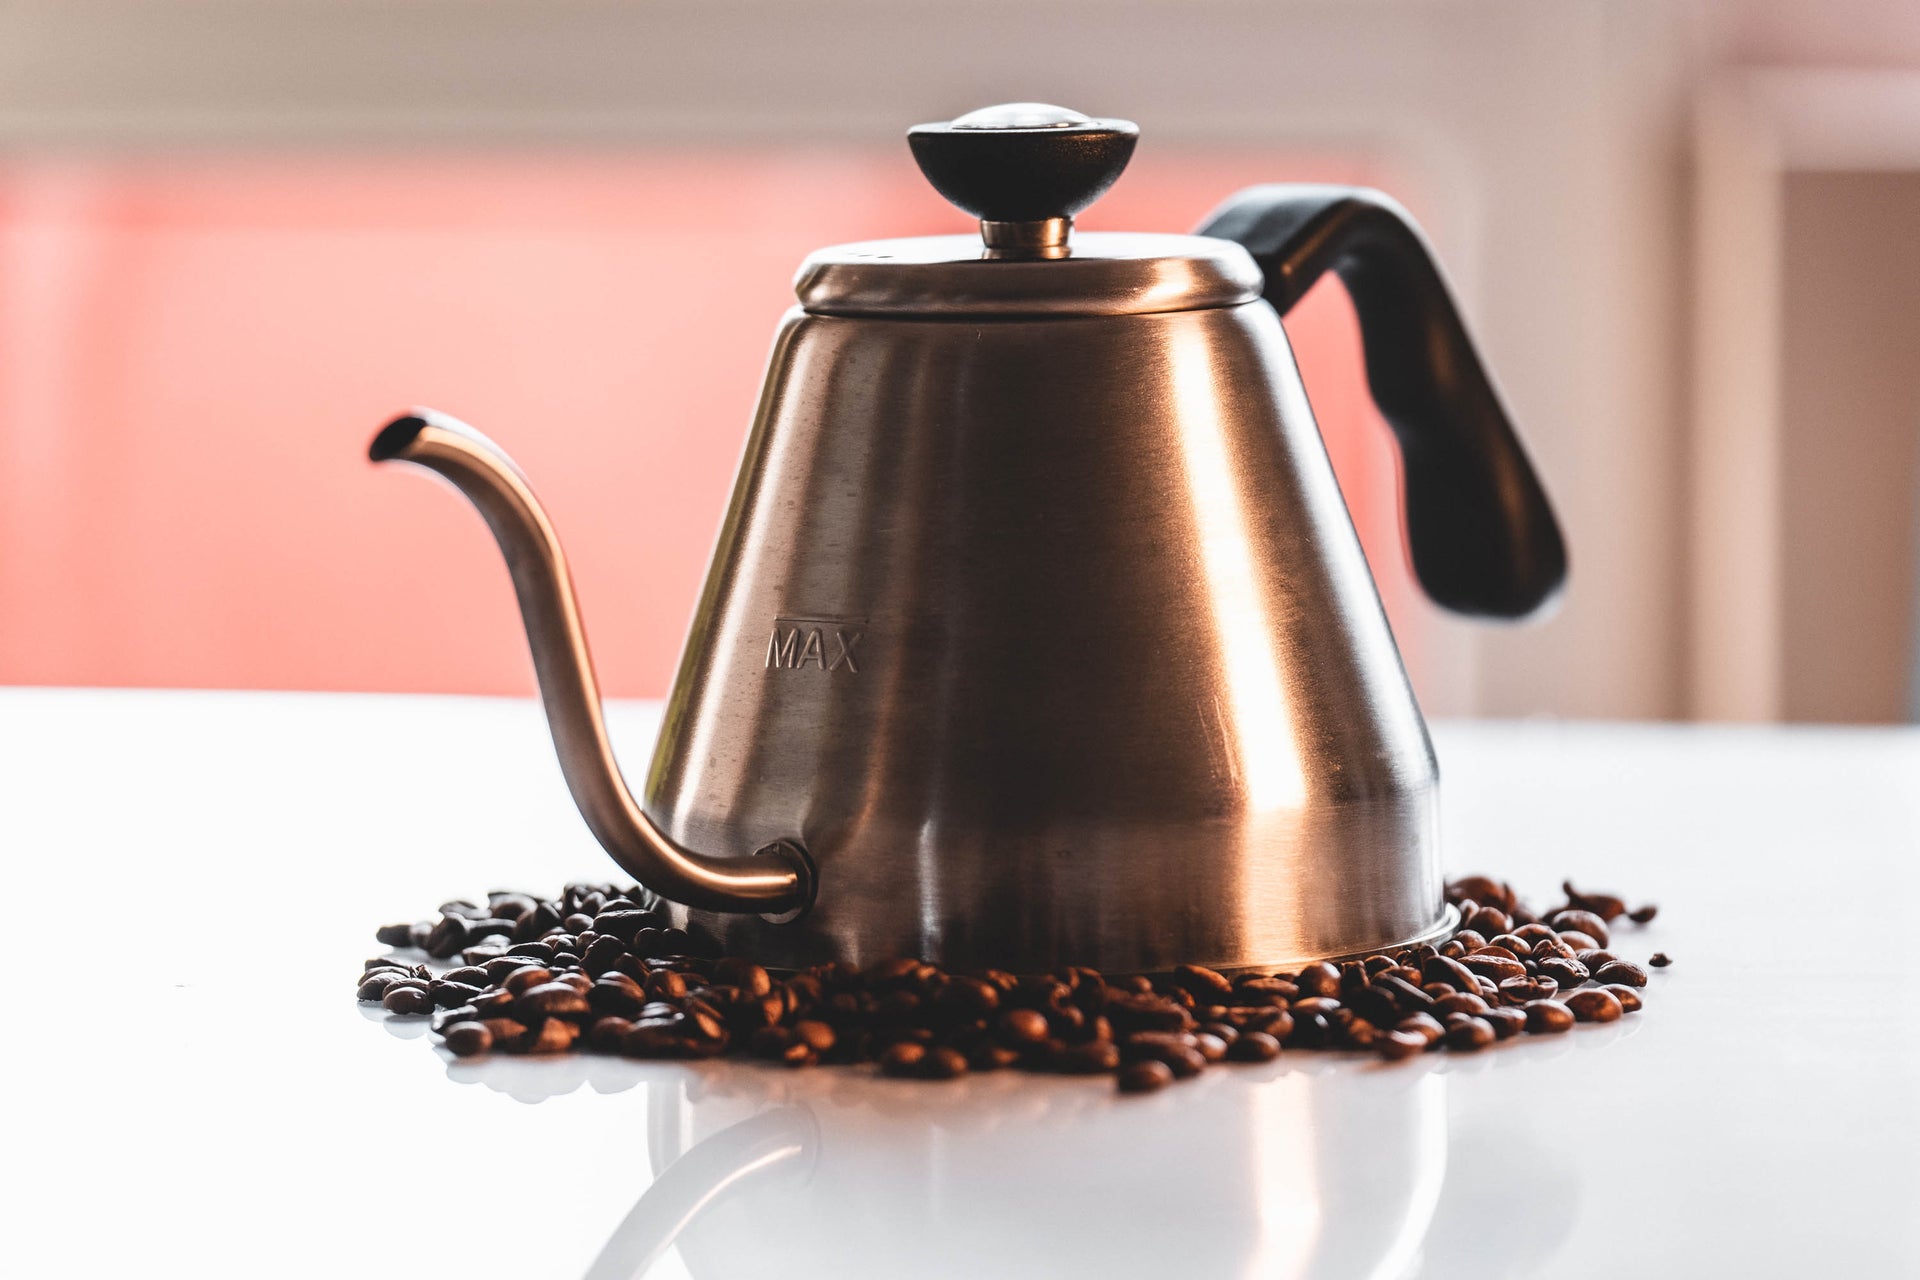 Bonavita Electric Kettle Review: Perfect For Pour-Overs?